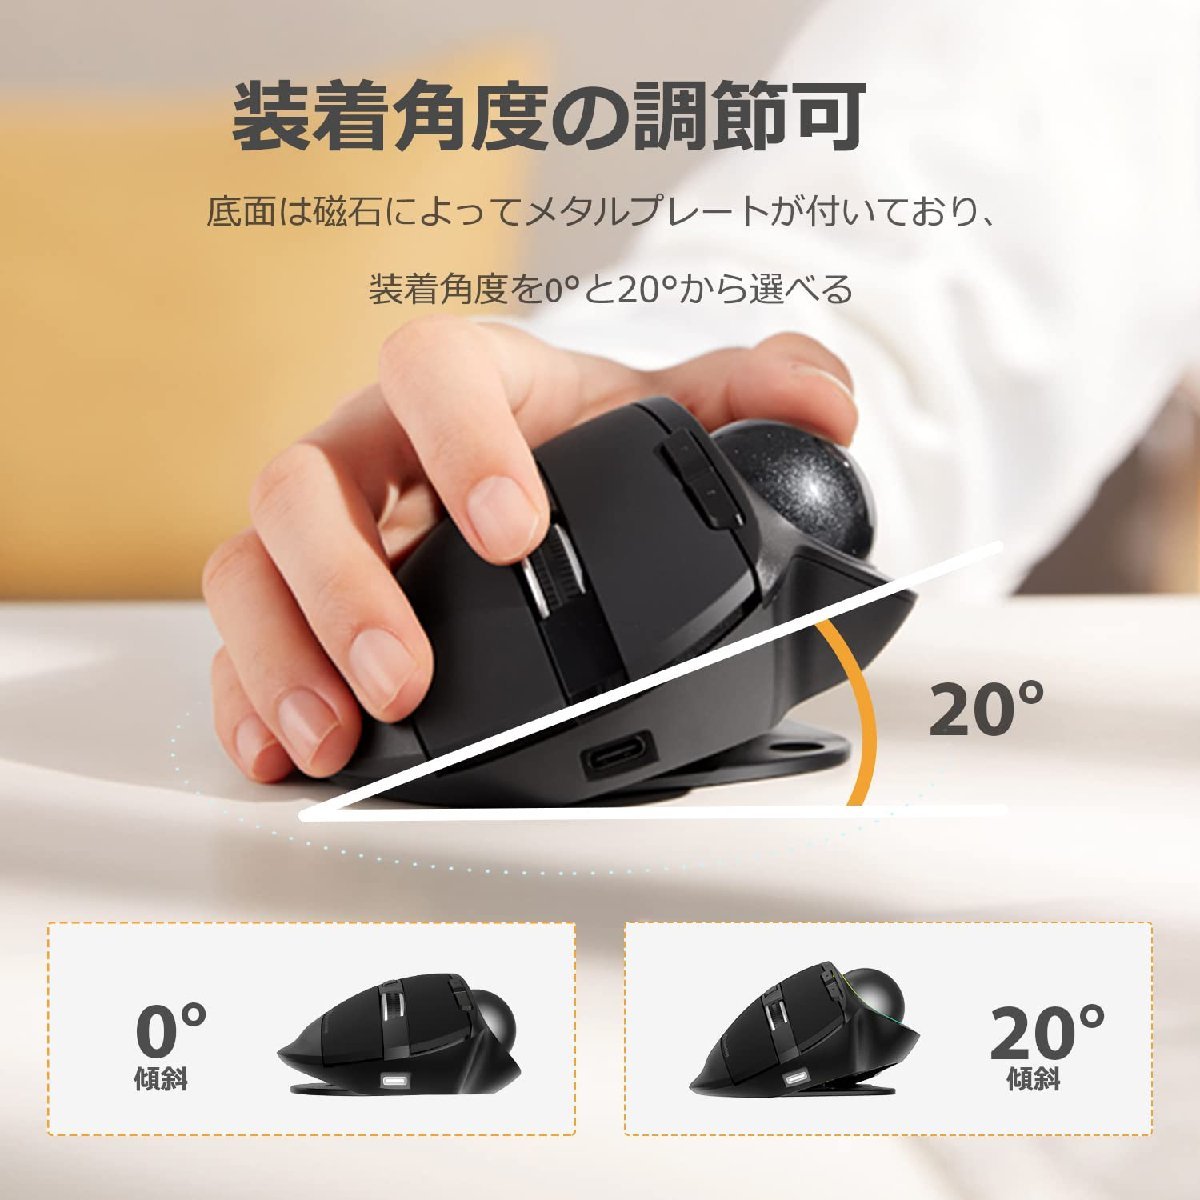  free shipping * trackball mouse RGB light attaching 2.4G.Bluetooth both correspondence wireless mouse 7 button ( black )